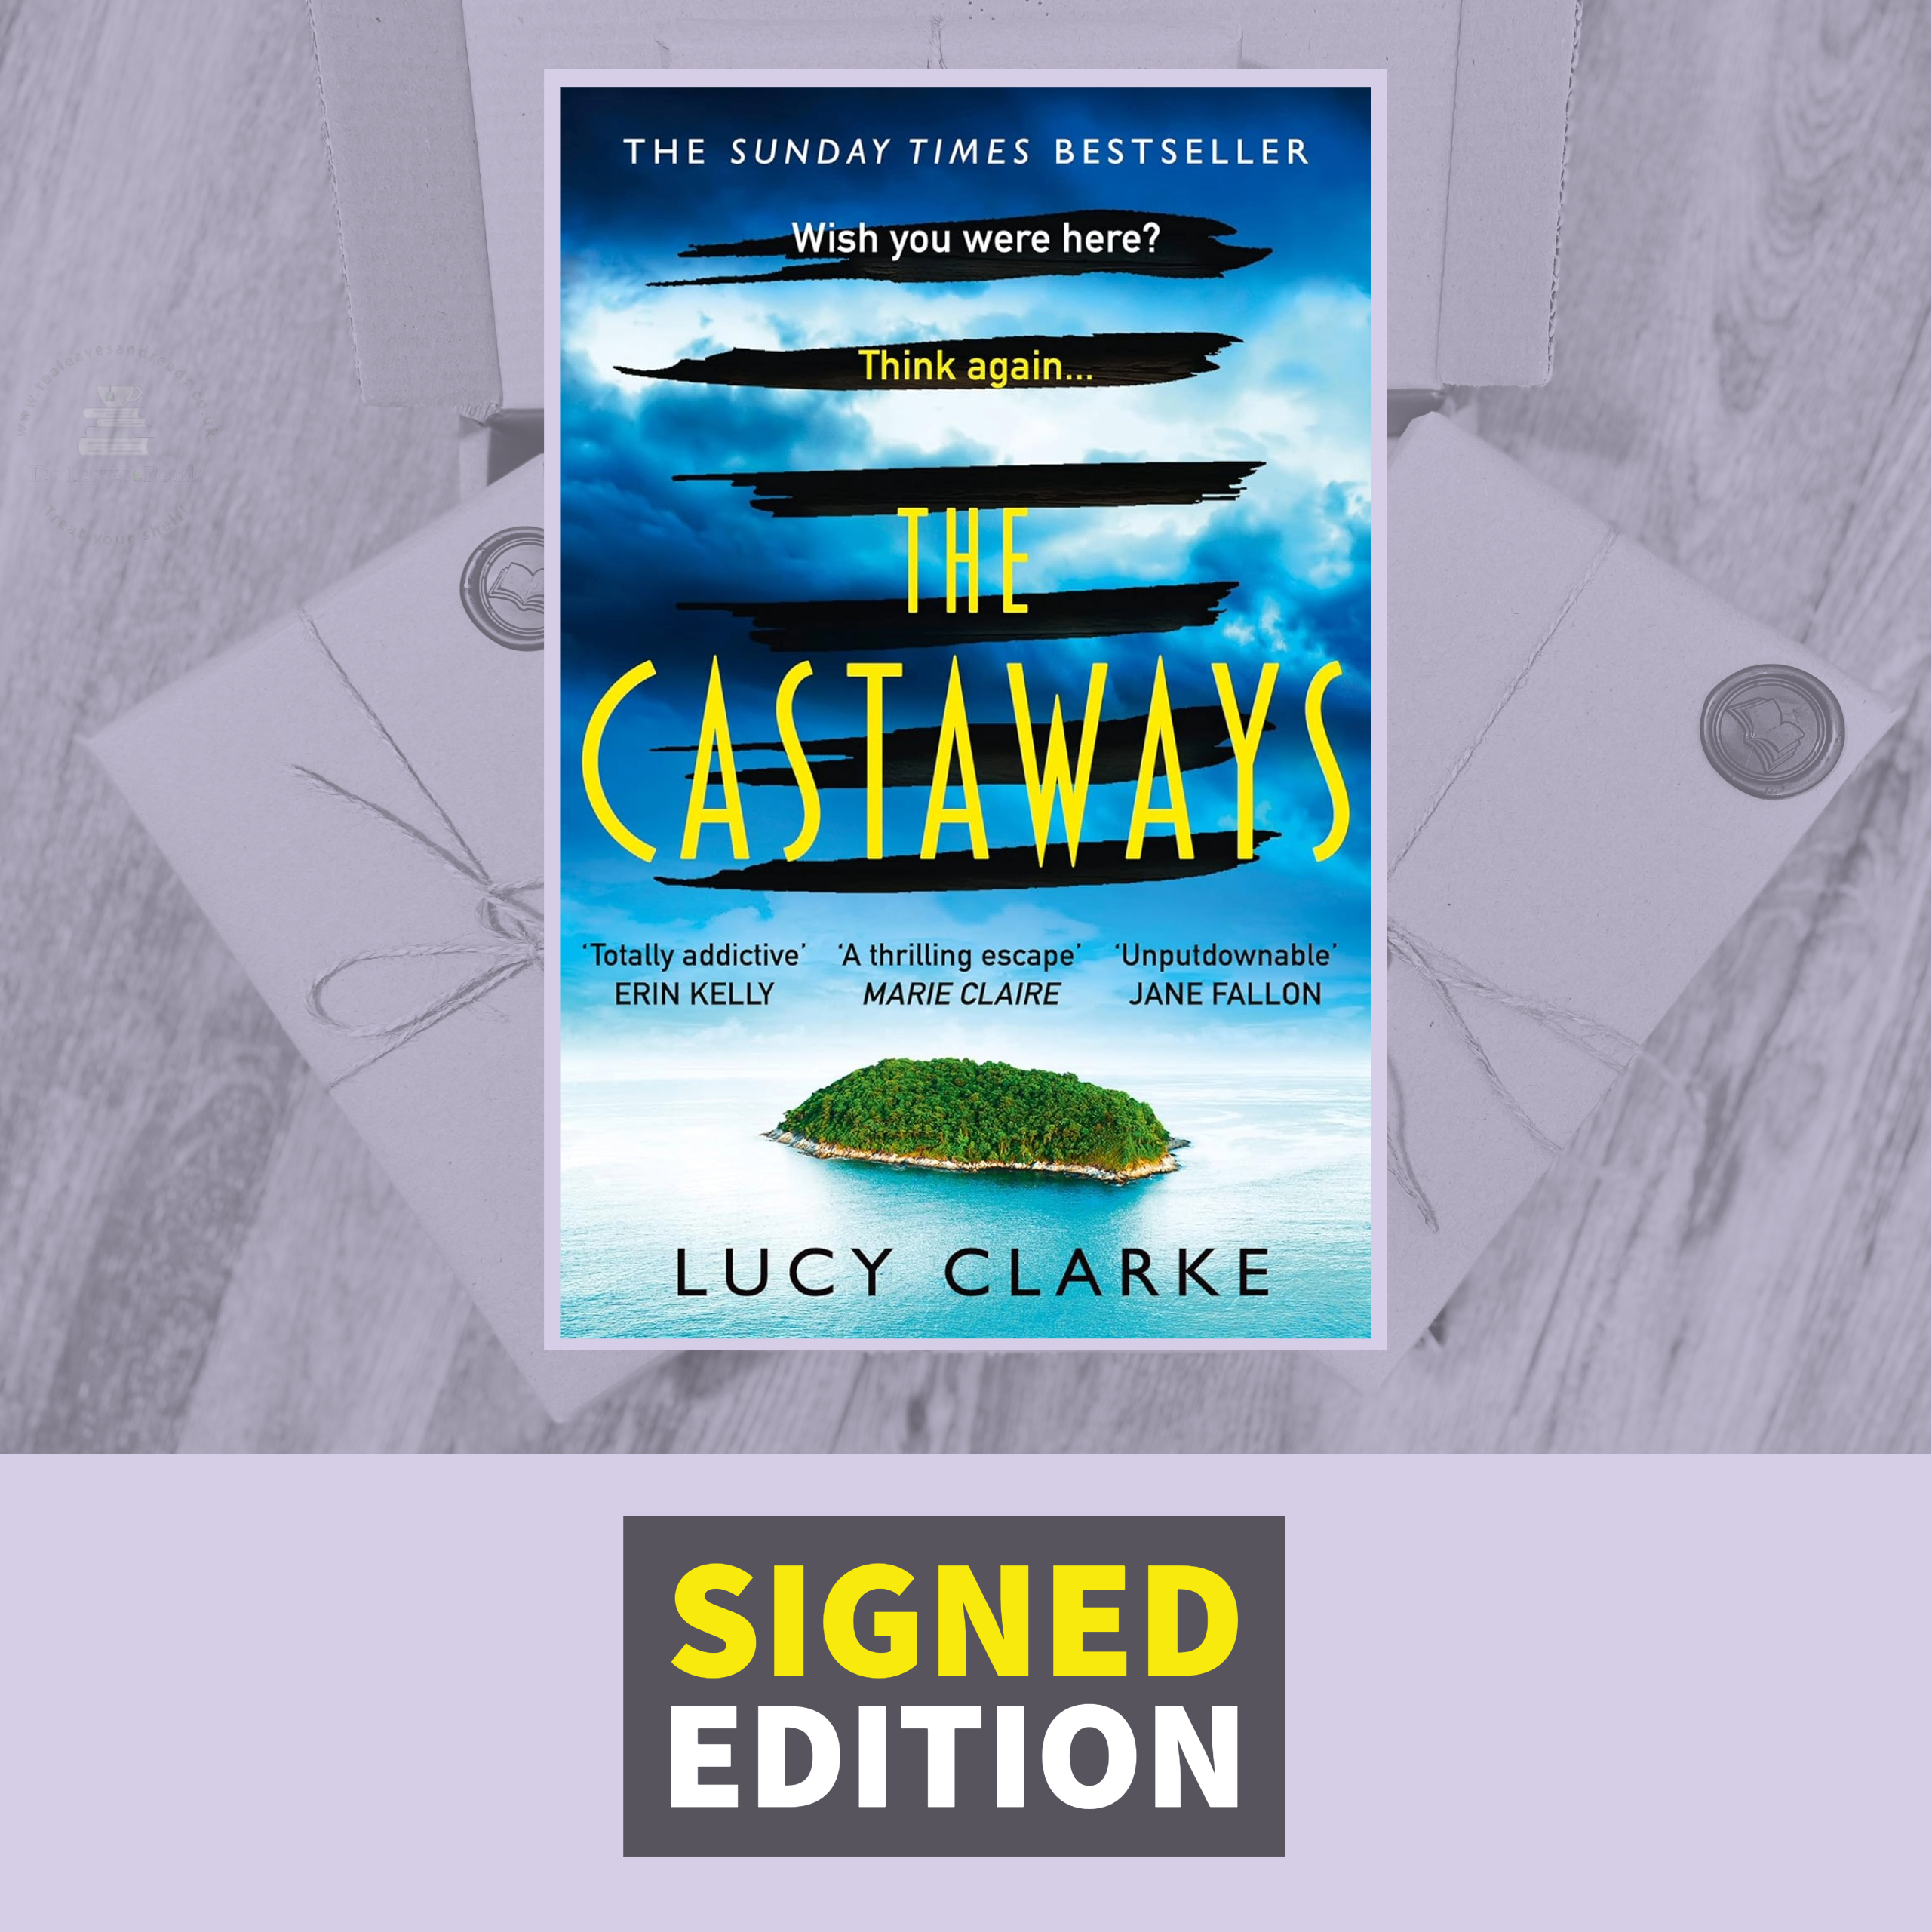 The Castaways by Lucy Clarke (Signed by the Author) - Tea Leaves & Reads